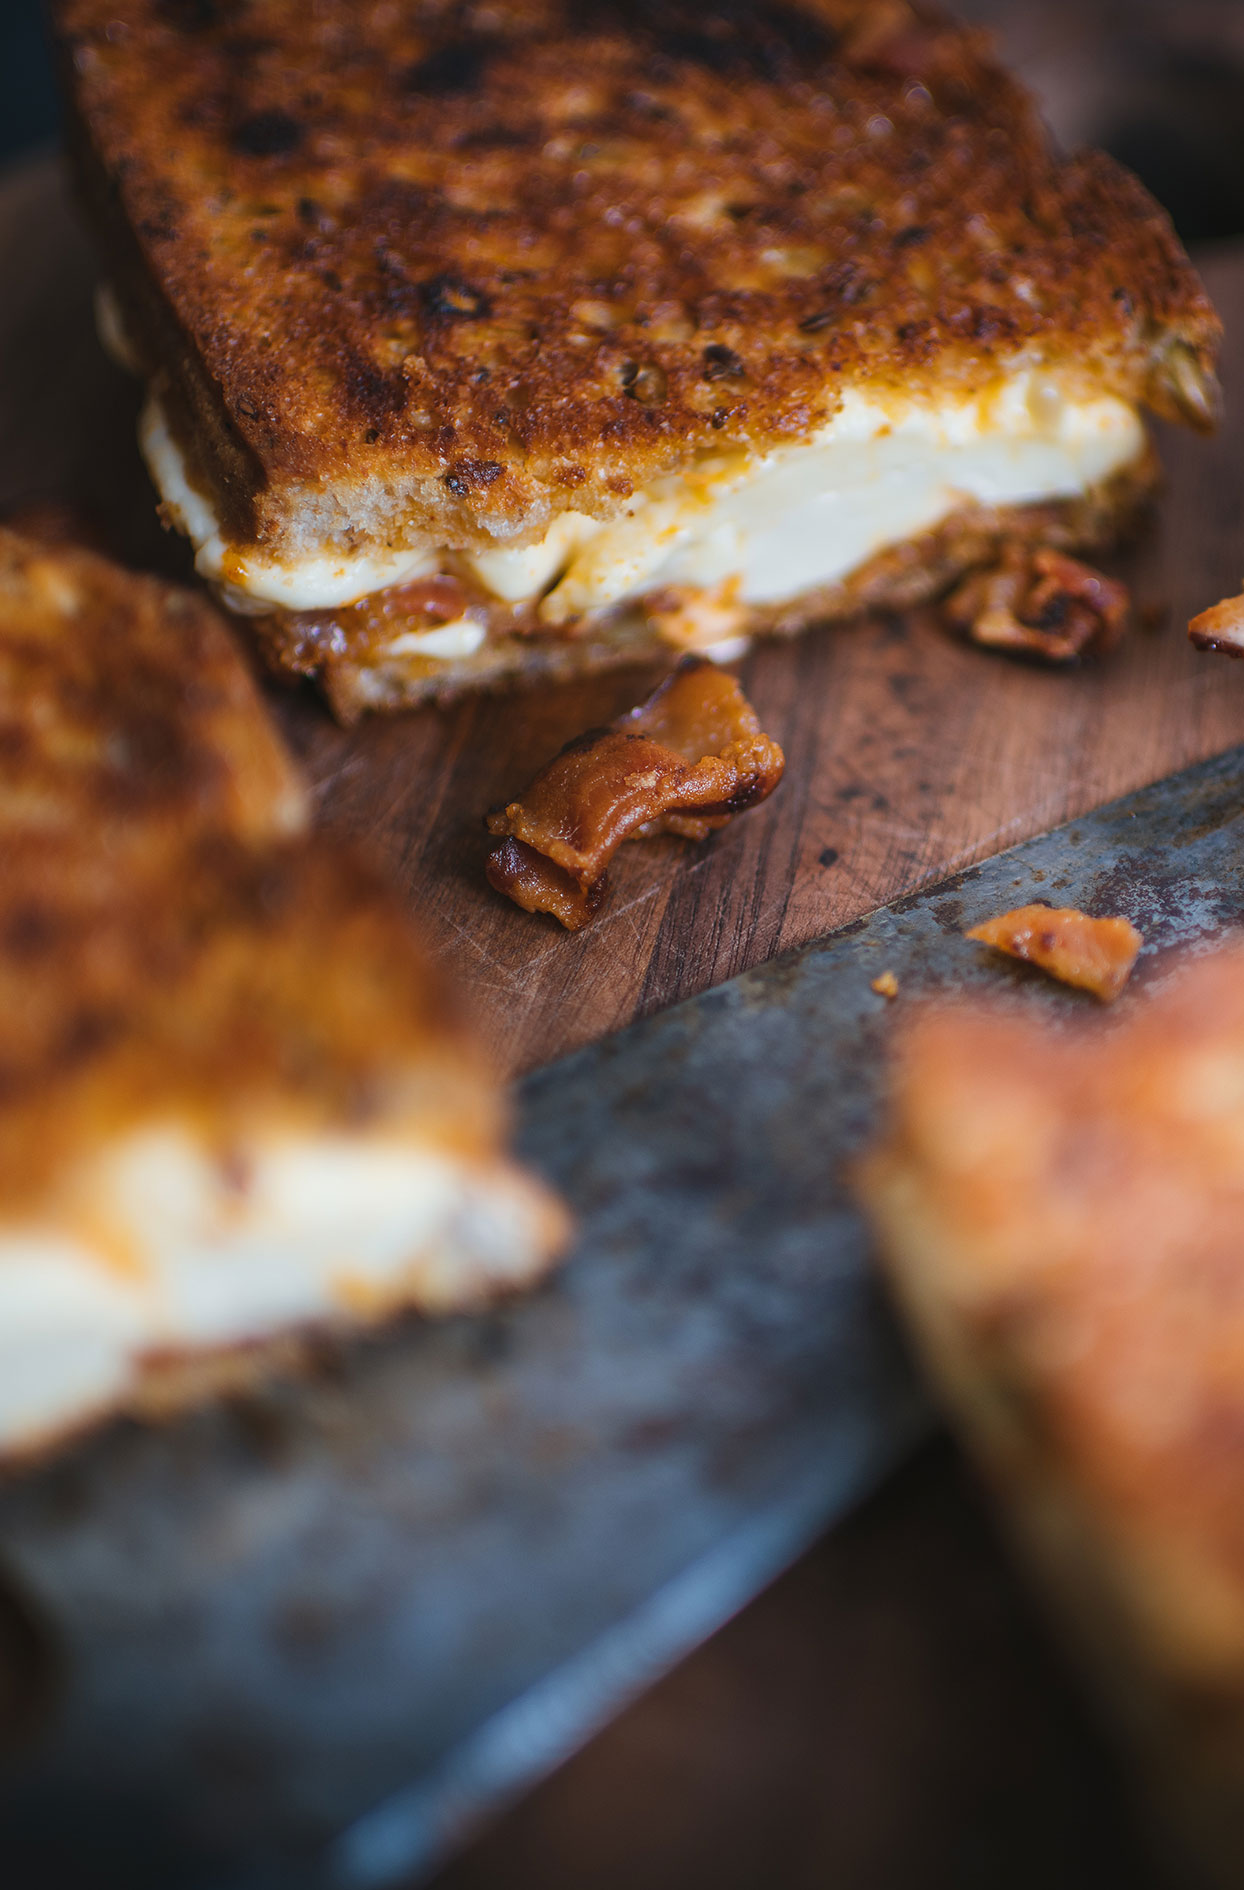 Spicy grilled cheese with bacon and cheese curds